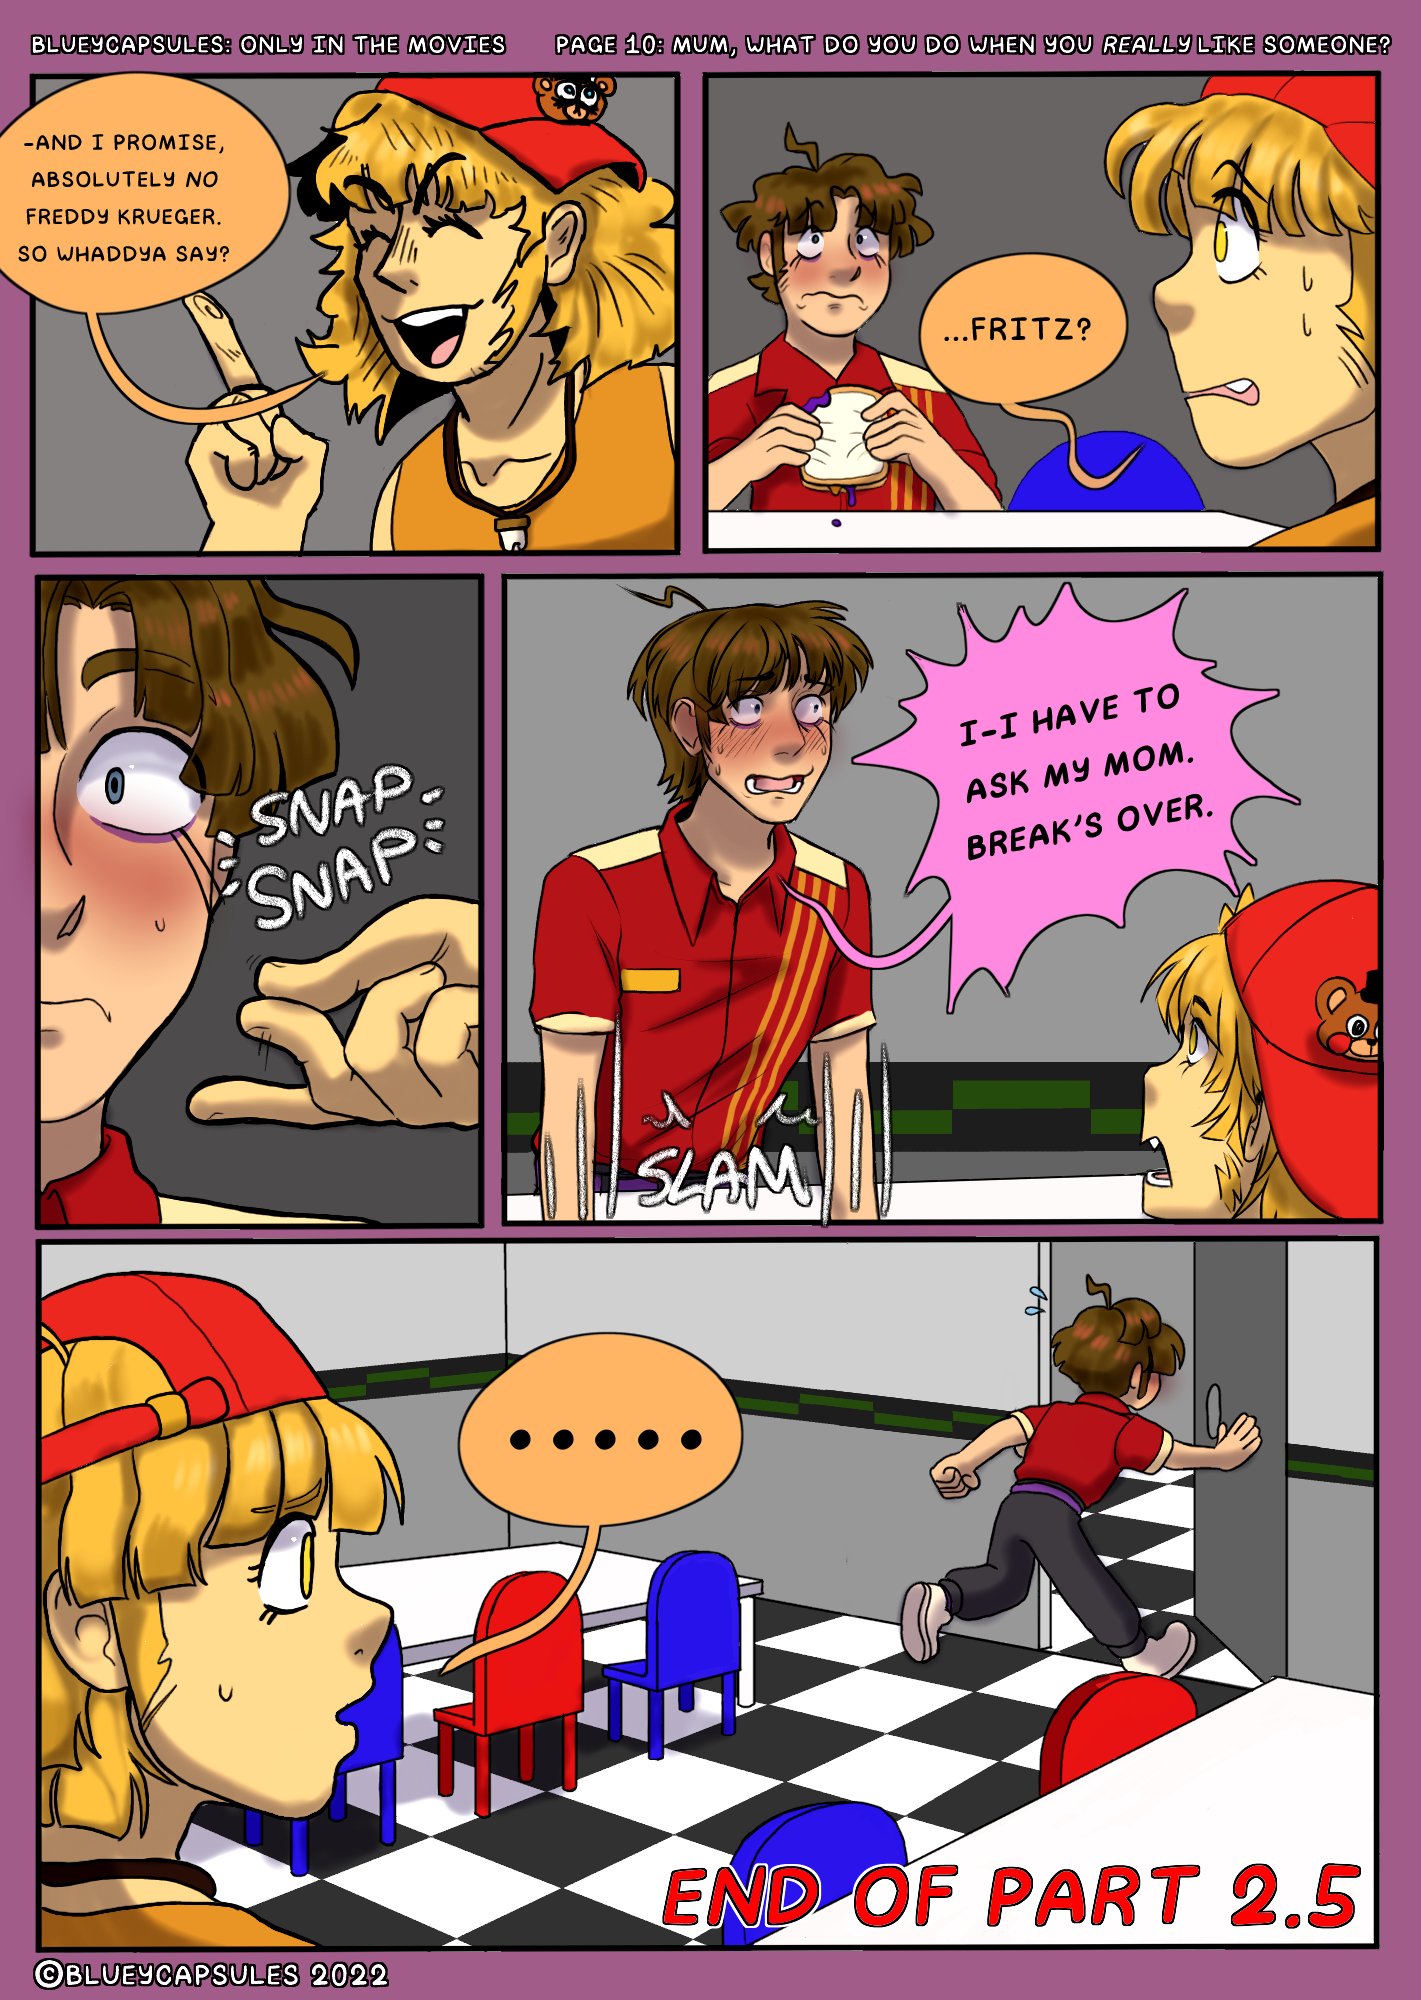 I'm very confused so blueycapsules posted a comic page and it had fritz but  I know he died is this a separate comic not cannon or? :  r/fivenightsatfreddys